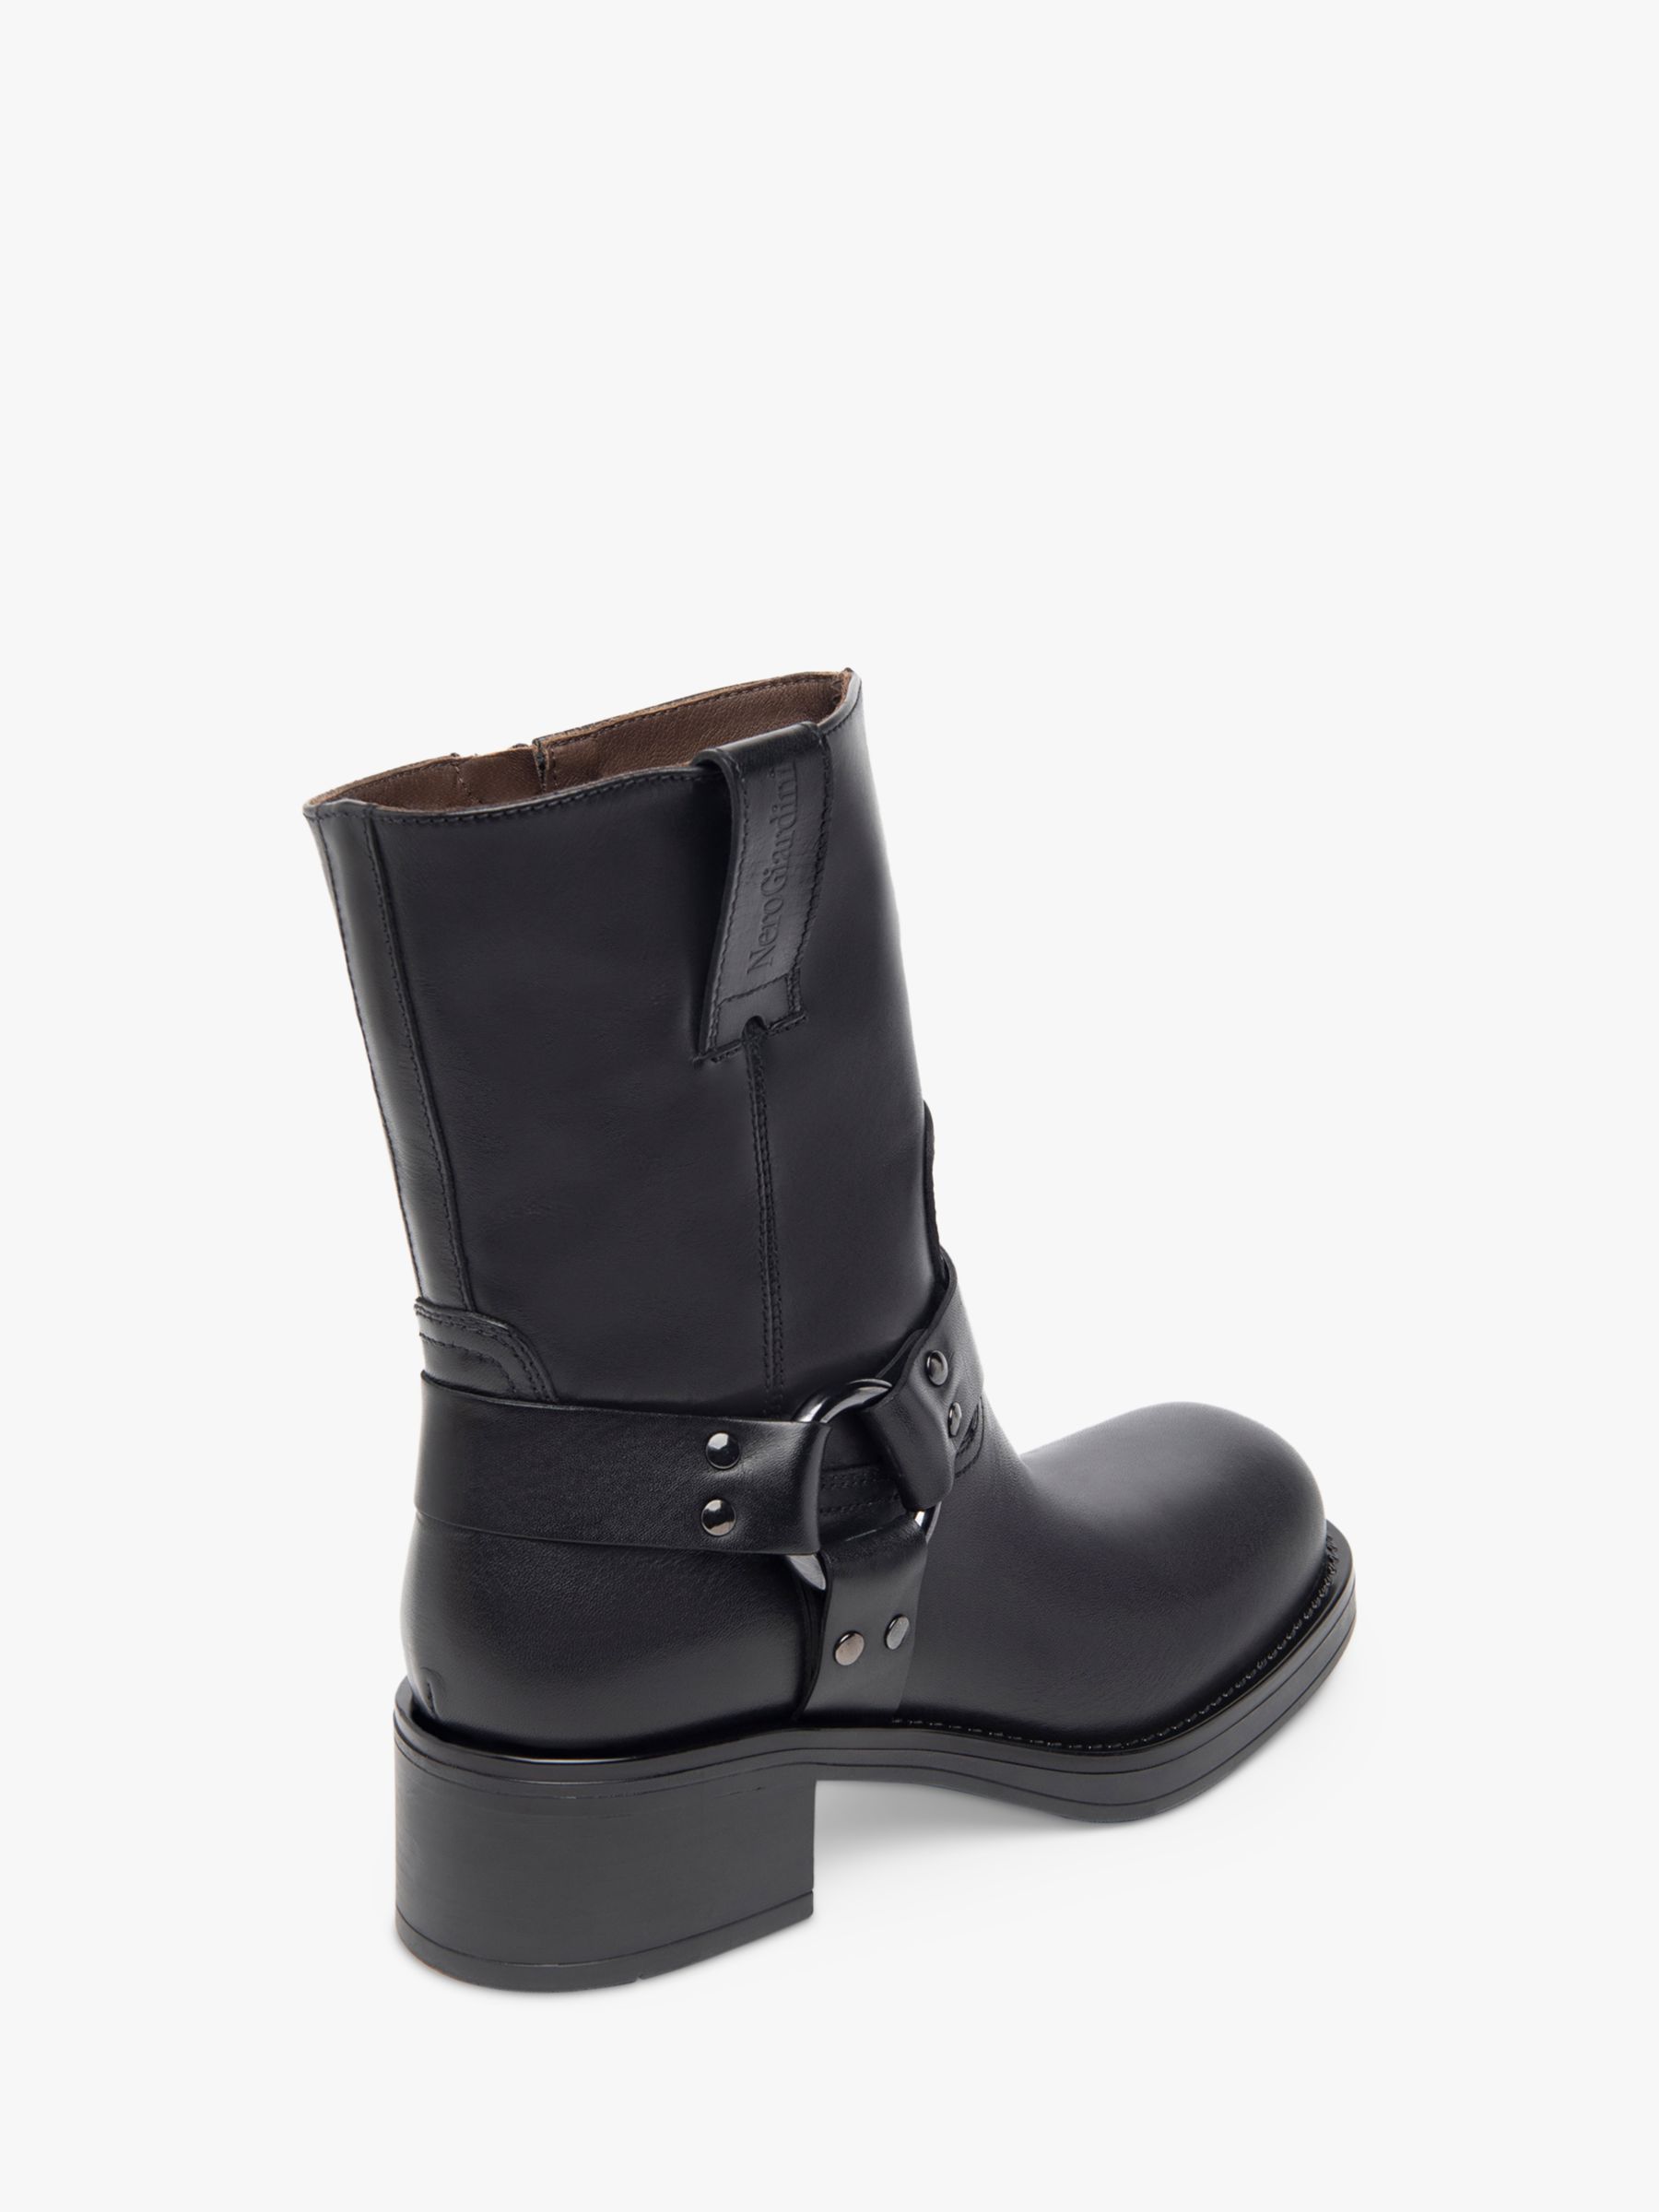 NeroGiardini Leather Outer Ring Biker Boots, Black at John Lewis & Partners